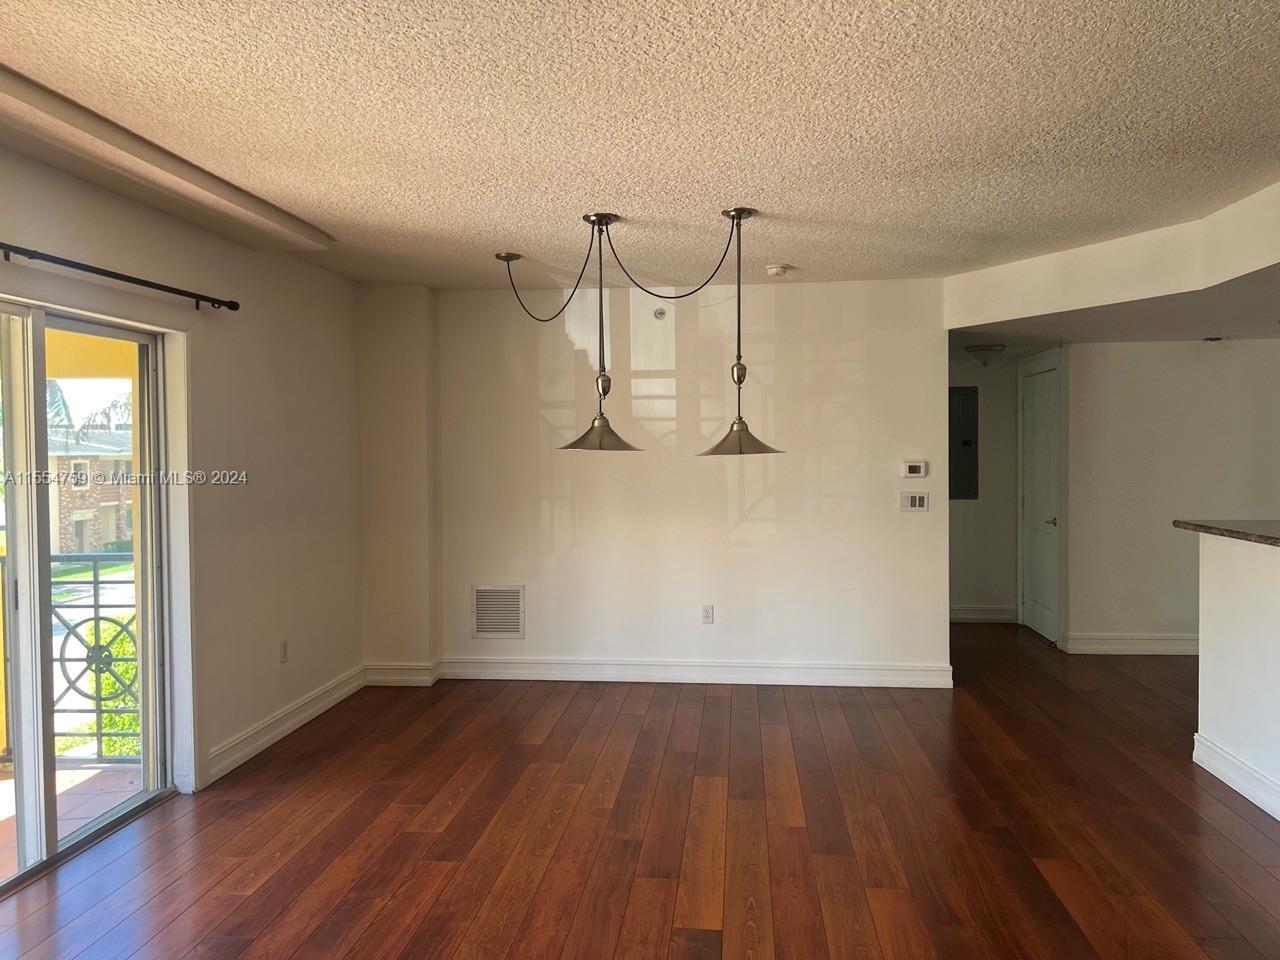 Photo of 101 Sidonia Ave #203 in Coral Gables, FL